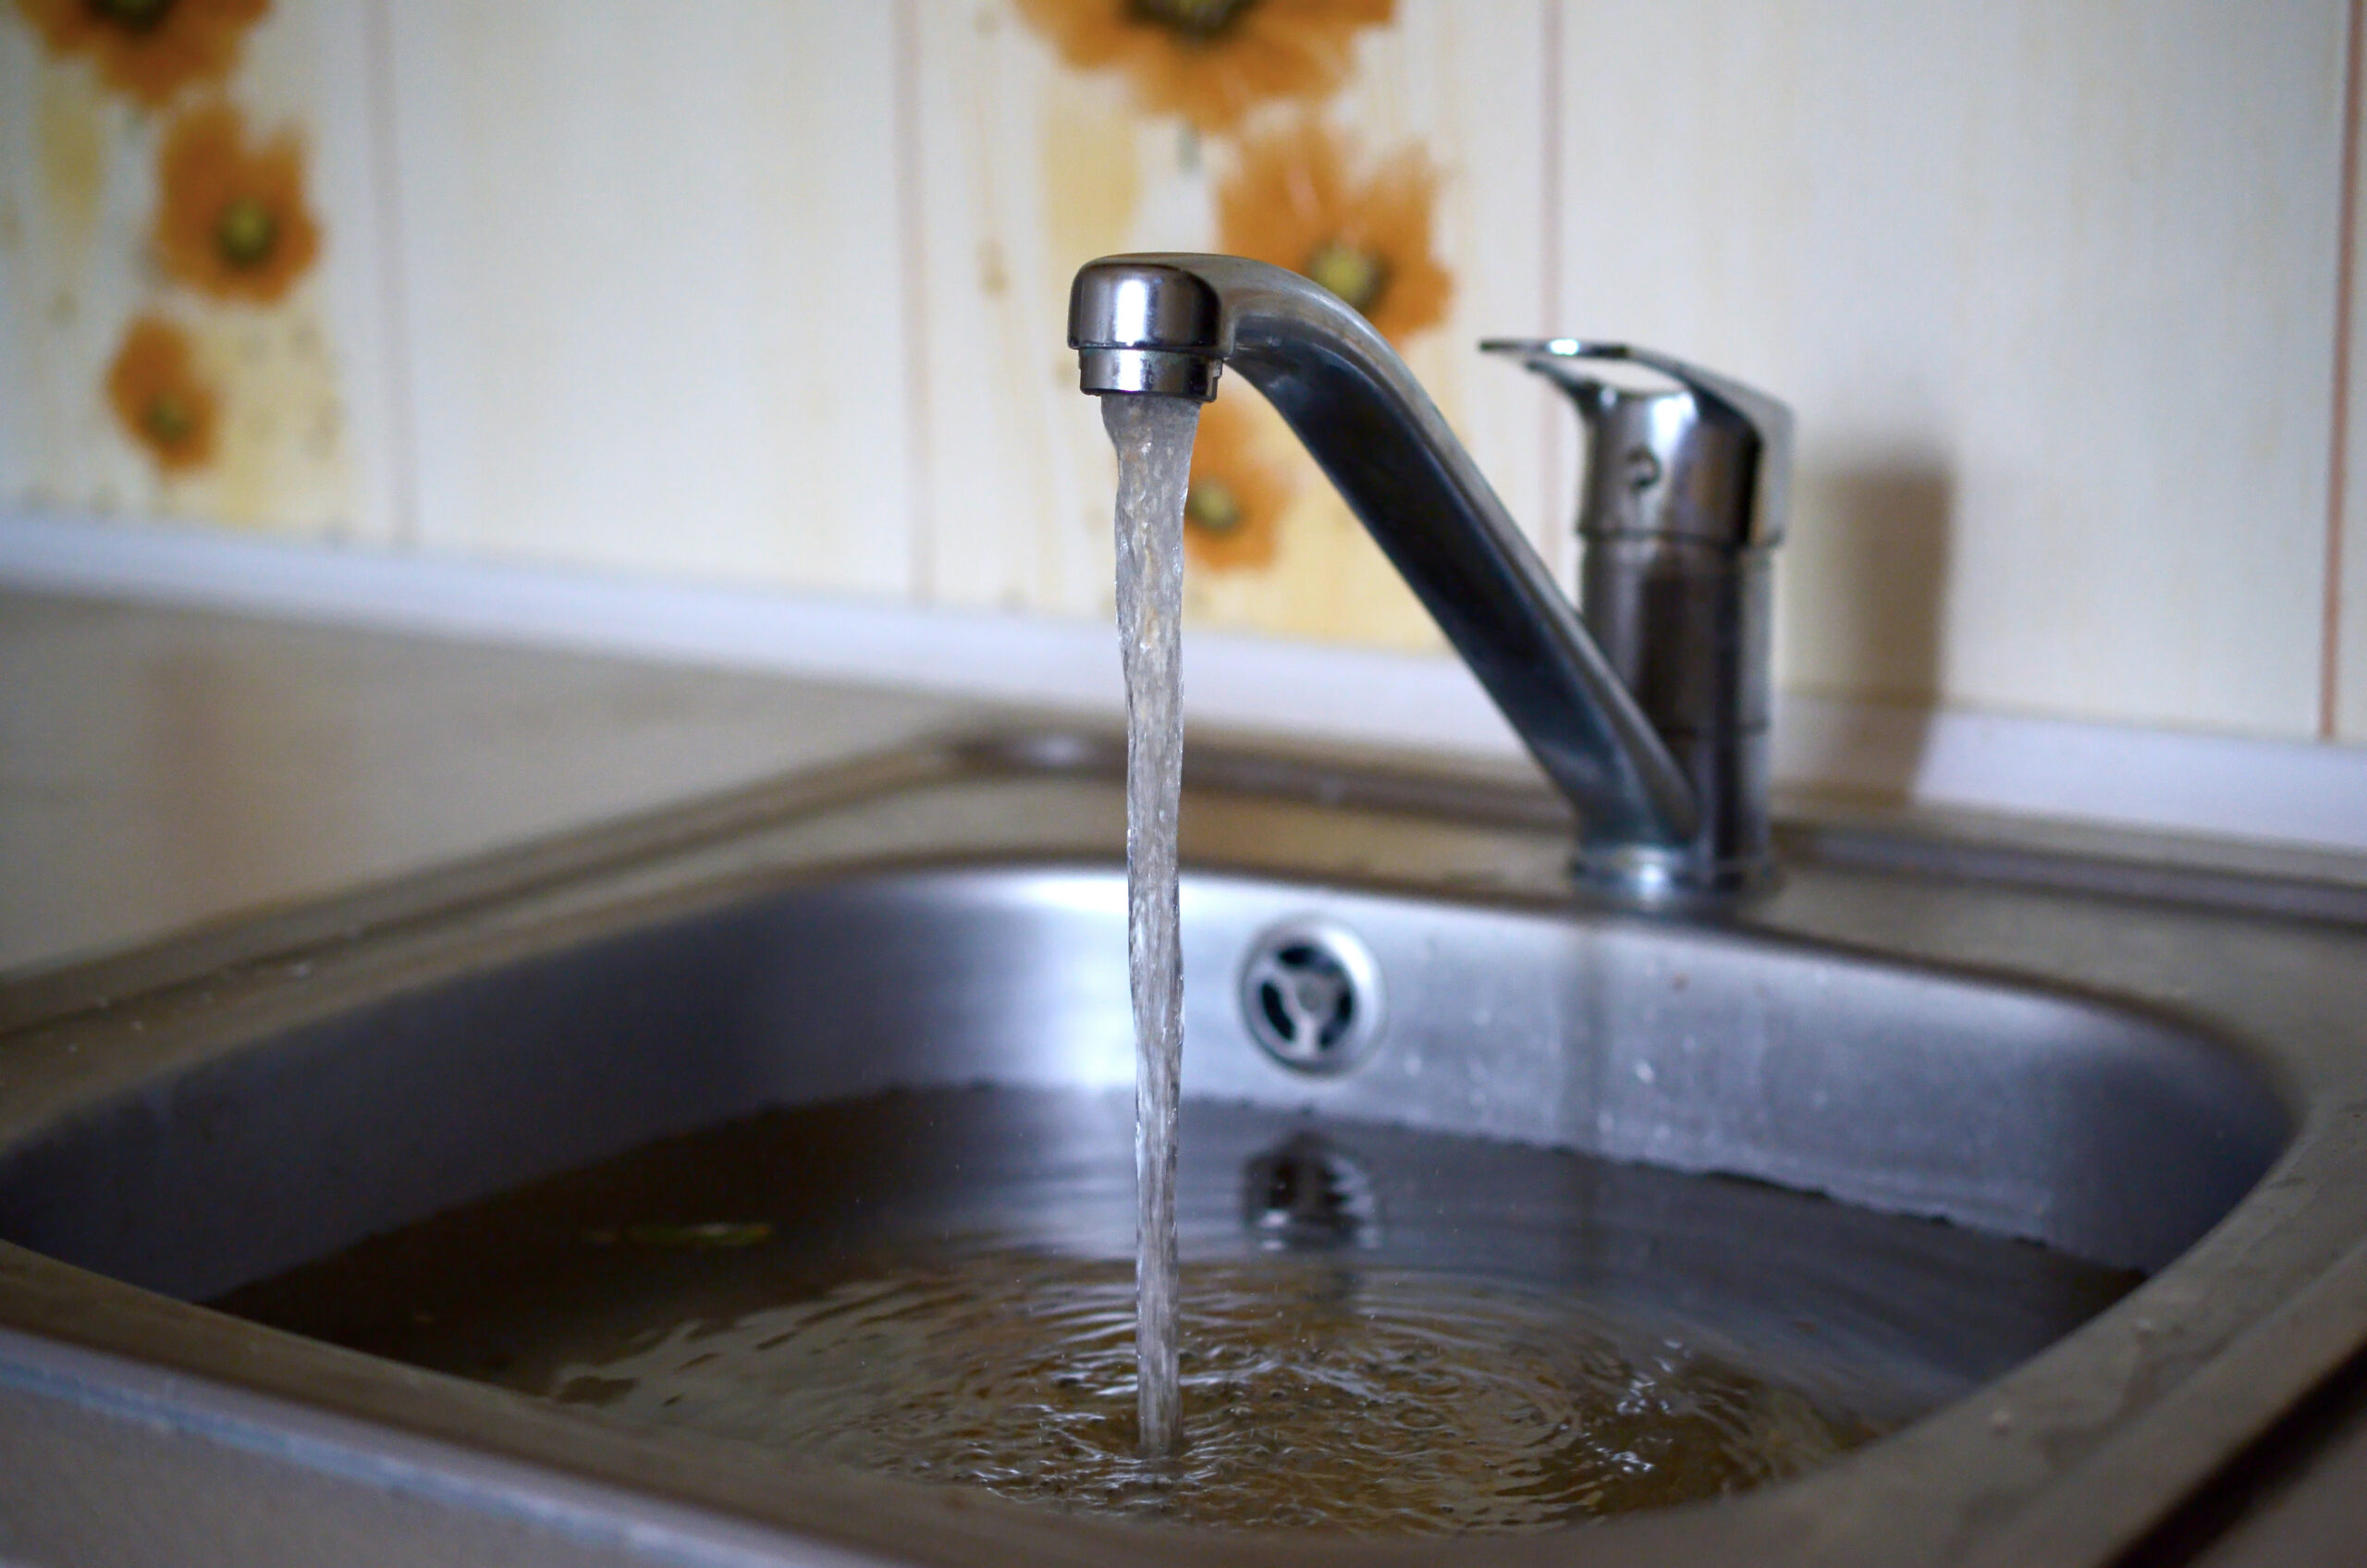 Common Signs You Need Drain Cleaning